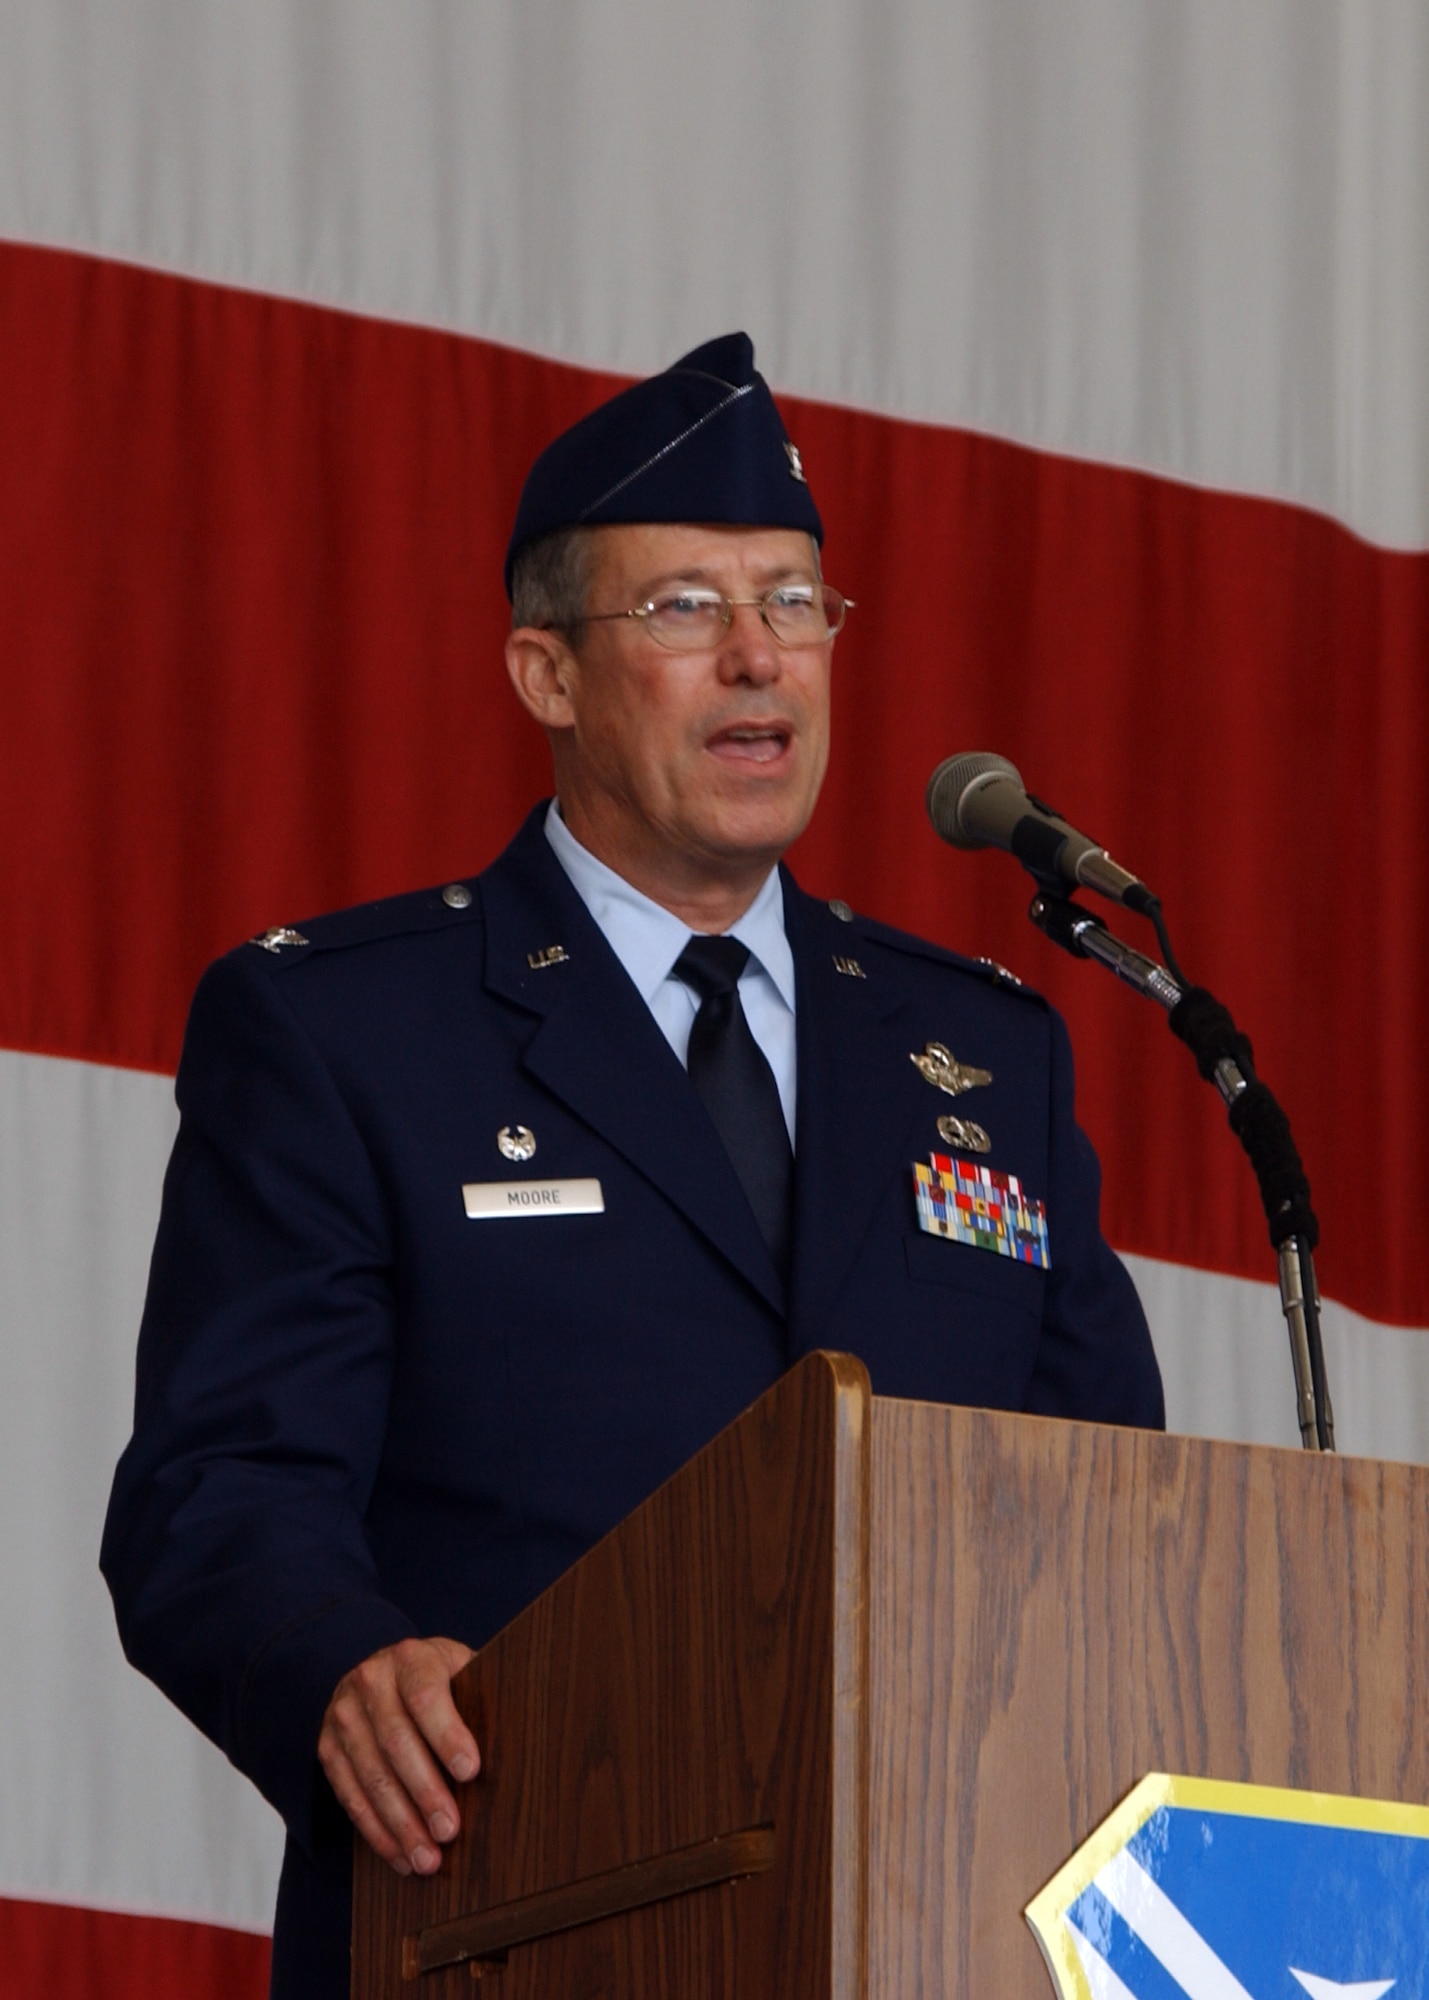 Brig. Gen. Thomas Moore, assumed command of the 116th Air Control Wing from Col. James Jones during a change of command ceremony March 23.  U.S. Air Force photo by Tech. Sgt. Mary Smith